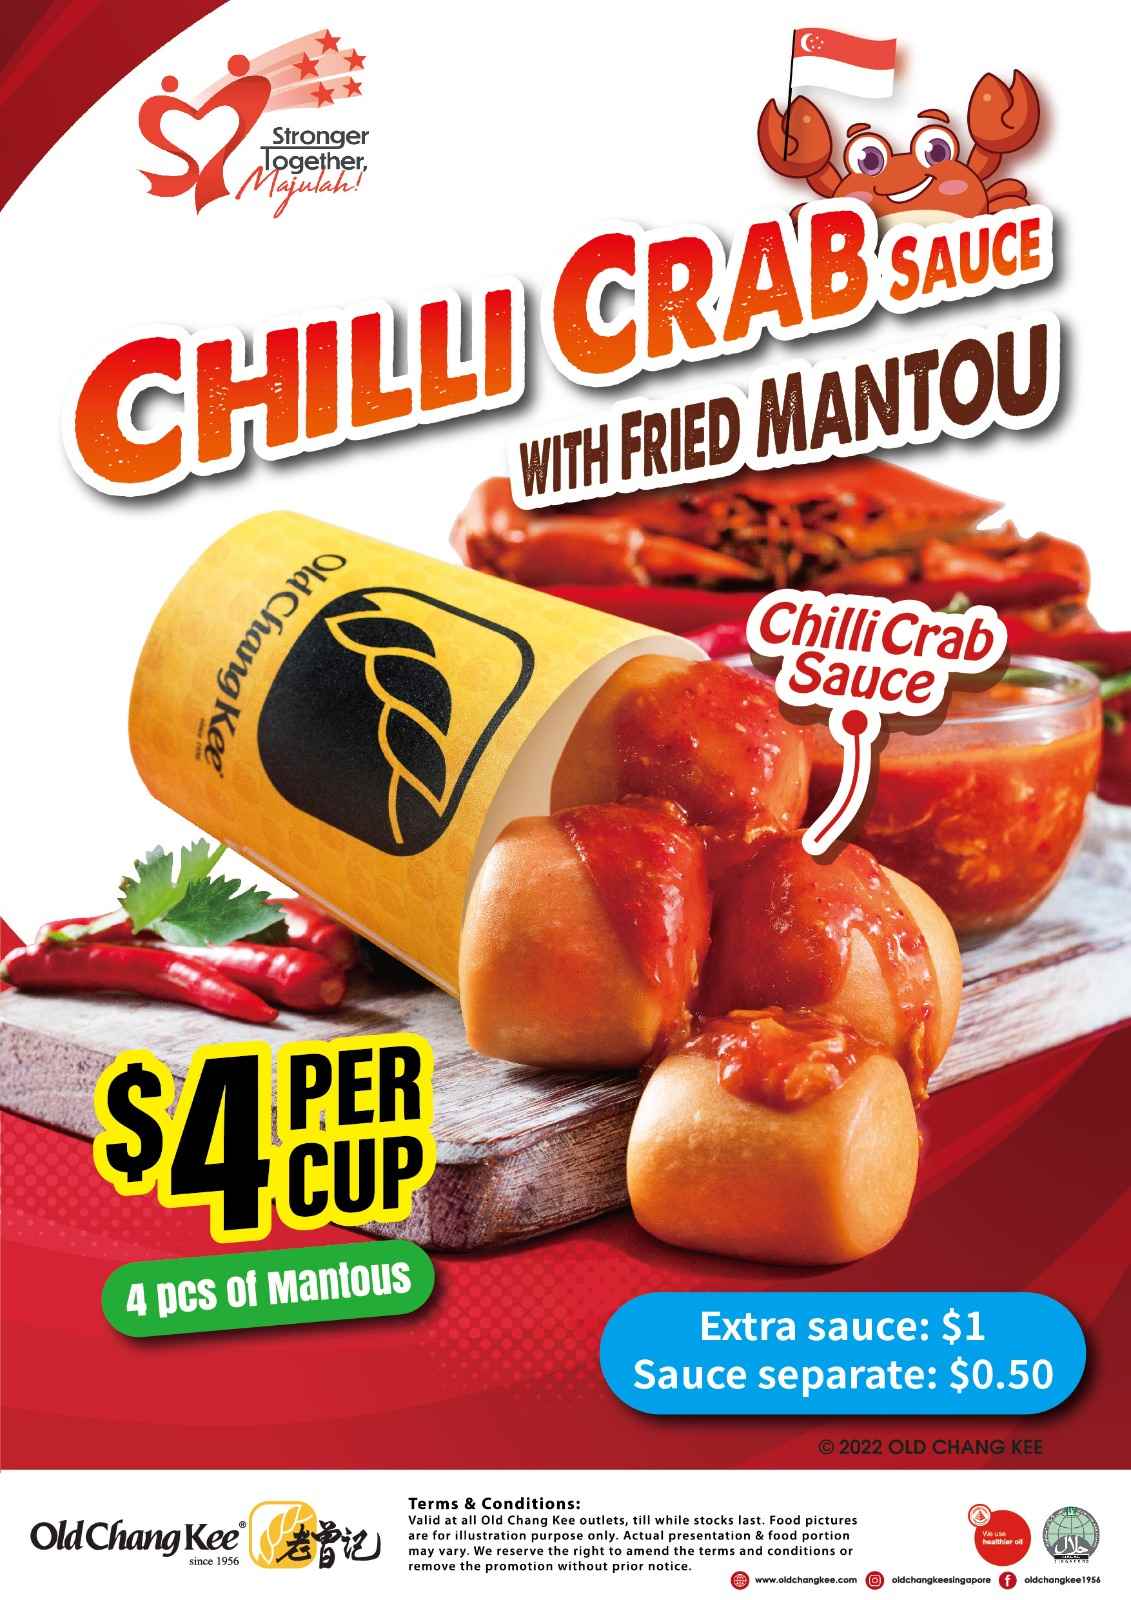 OCK Chilli Crab Sauce with Fried Mantou